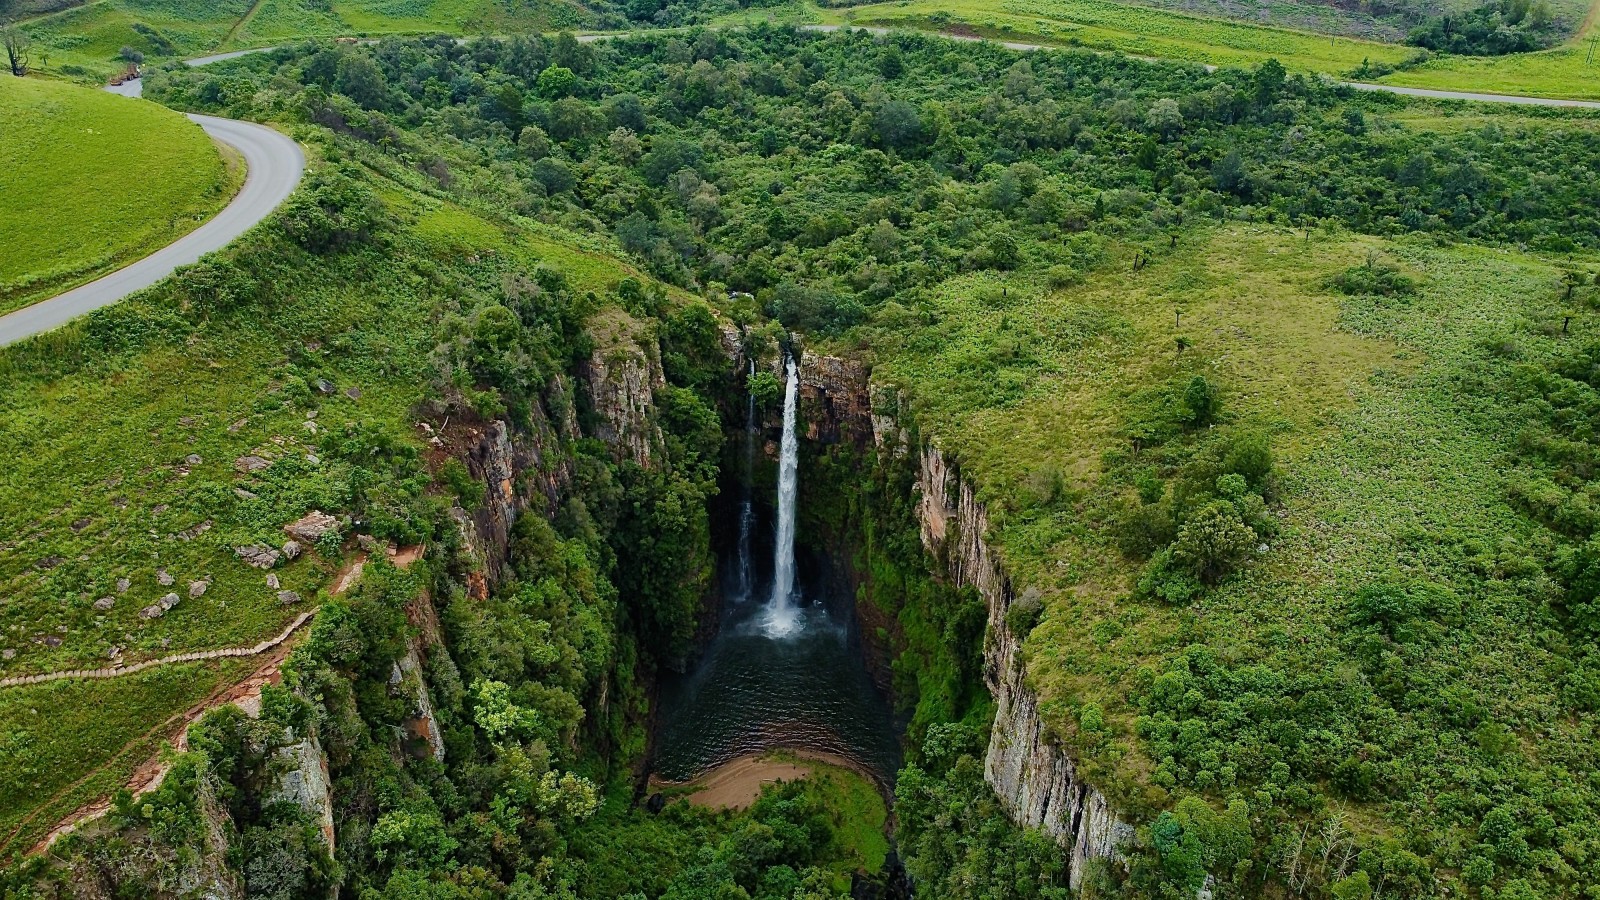 Waterfall surrounded by green mountains during daytime